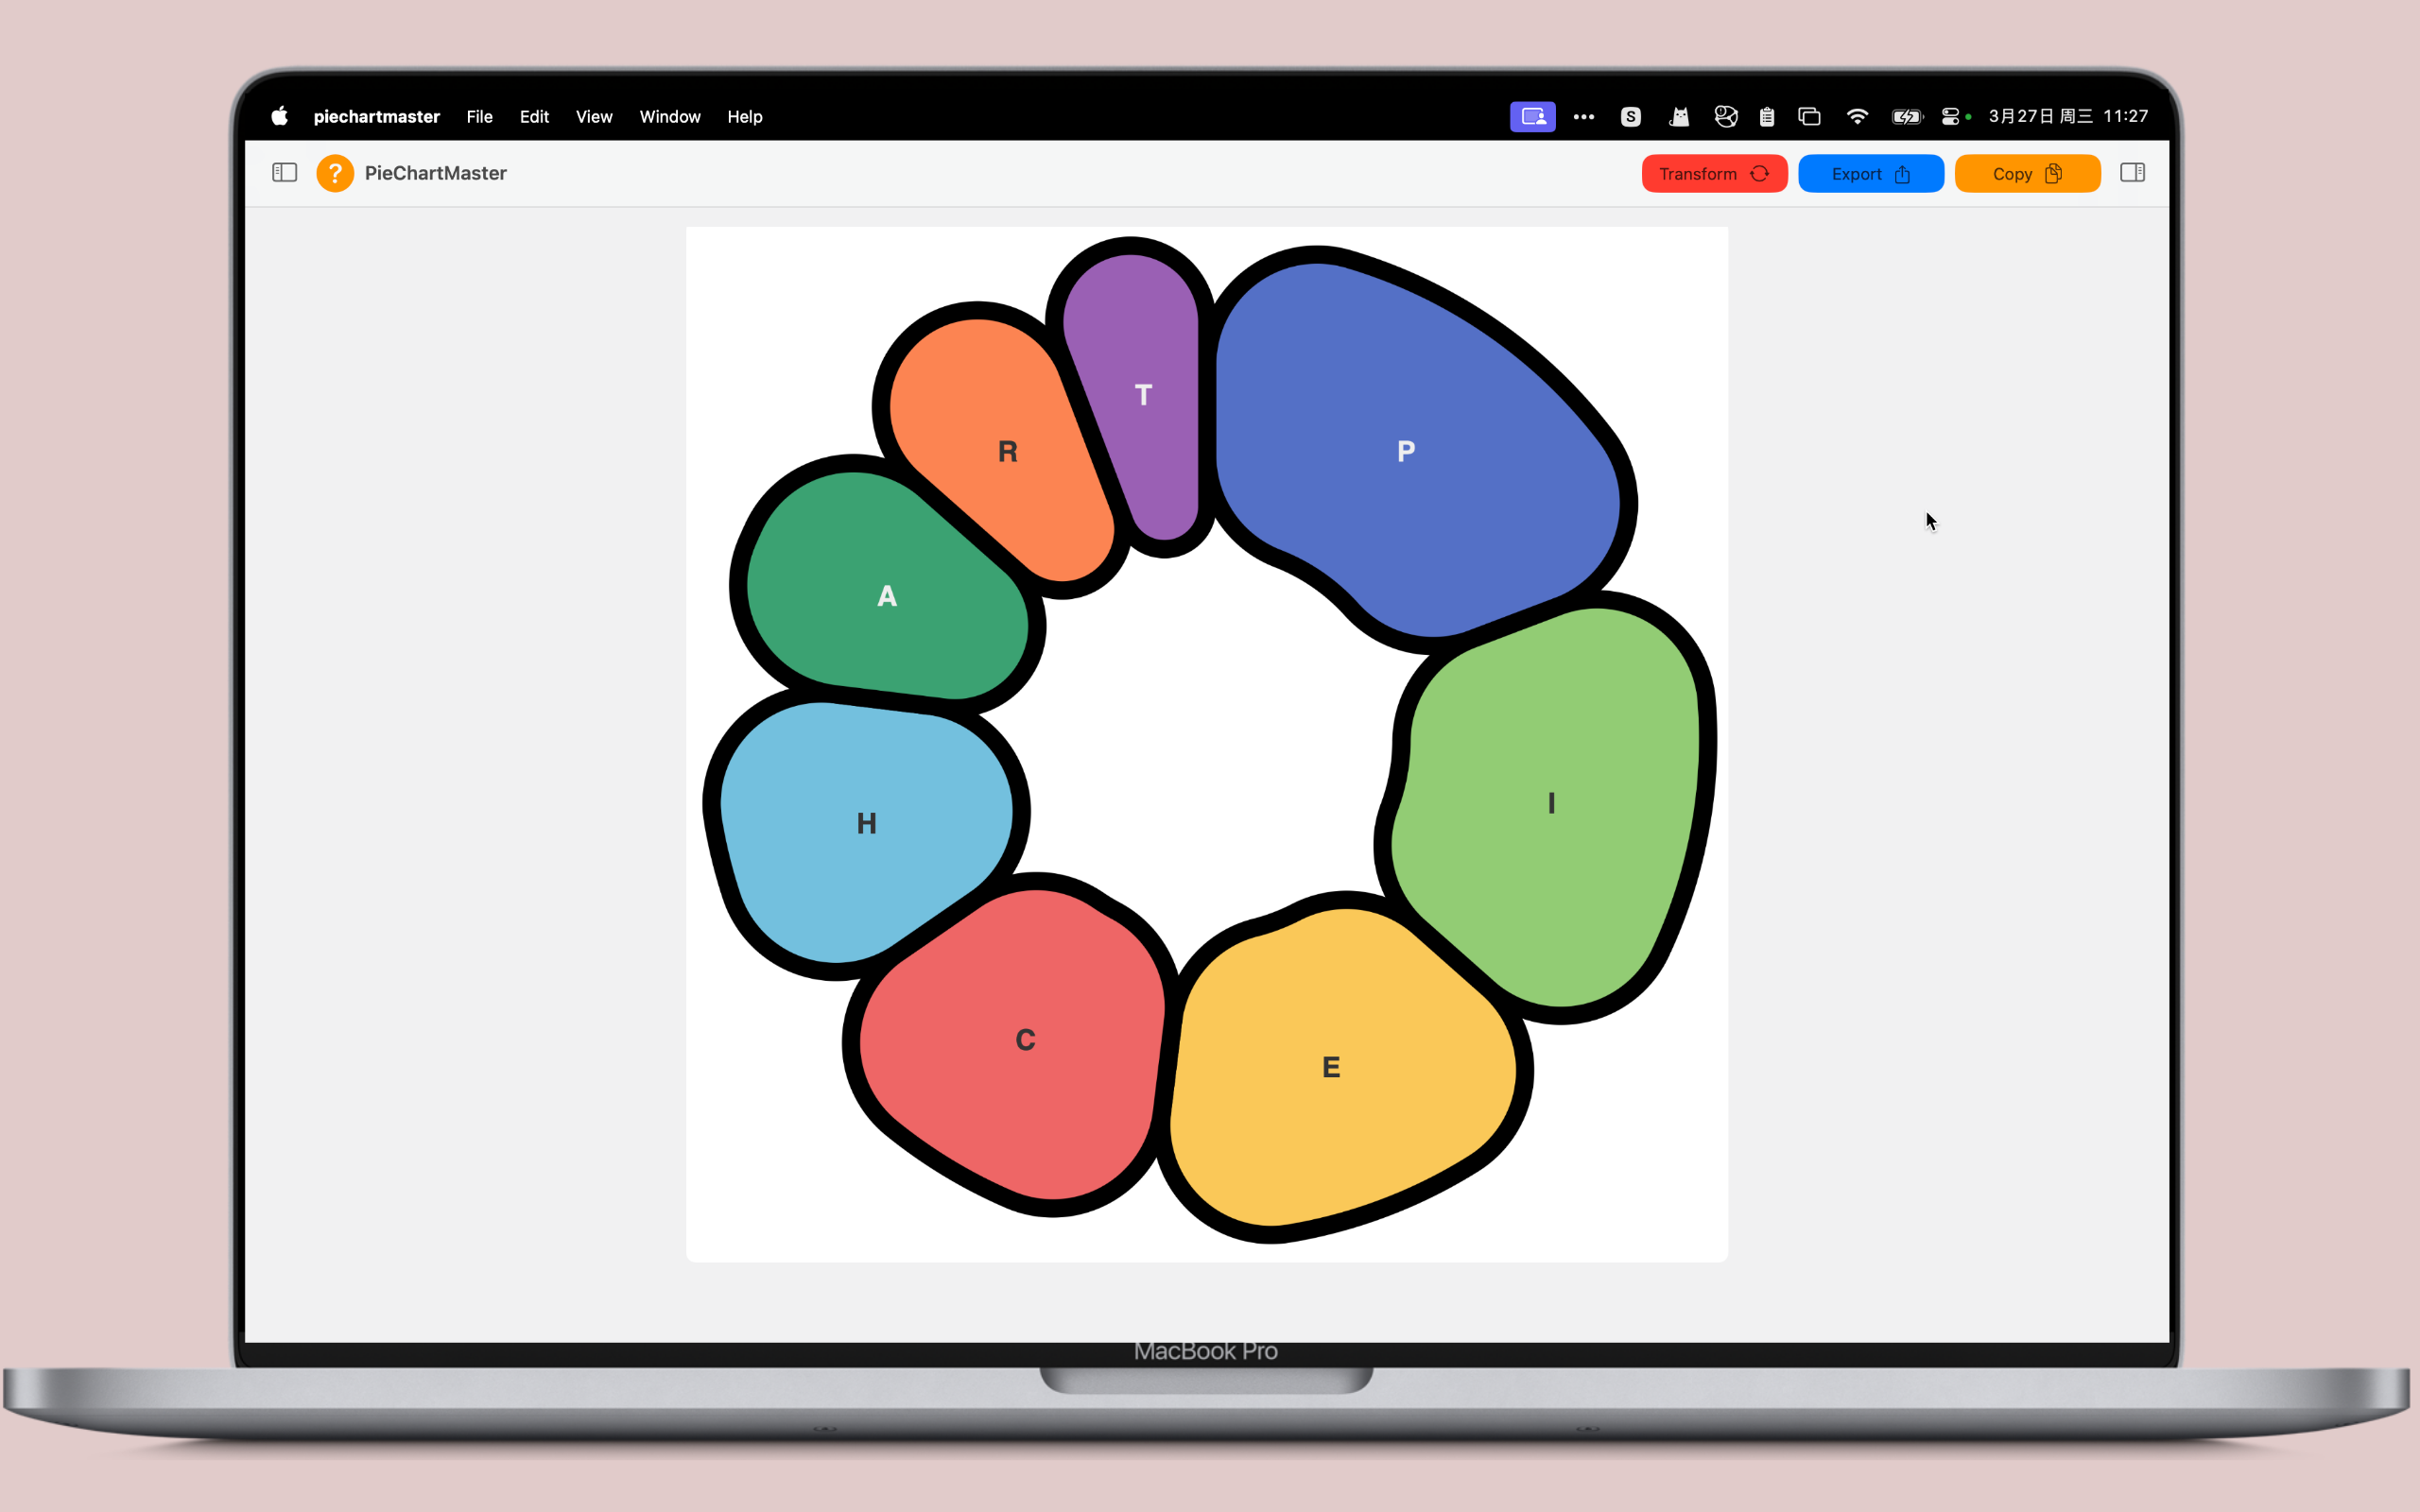 PieChartMaster – The Ultimate Pie/Rose Chart Maker! ｜ Free for a limited time